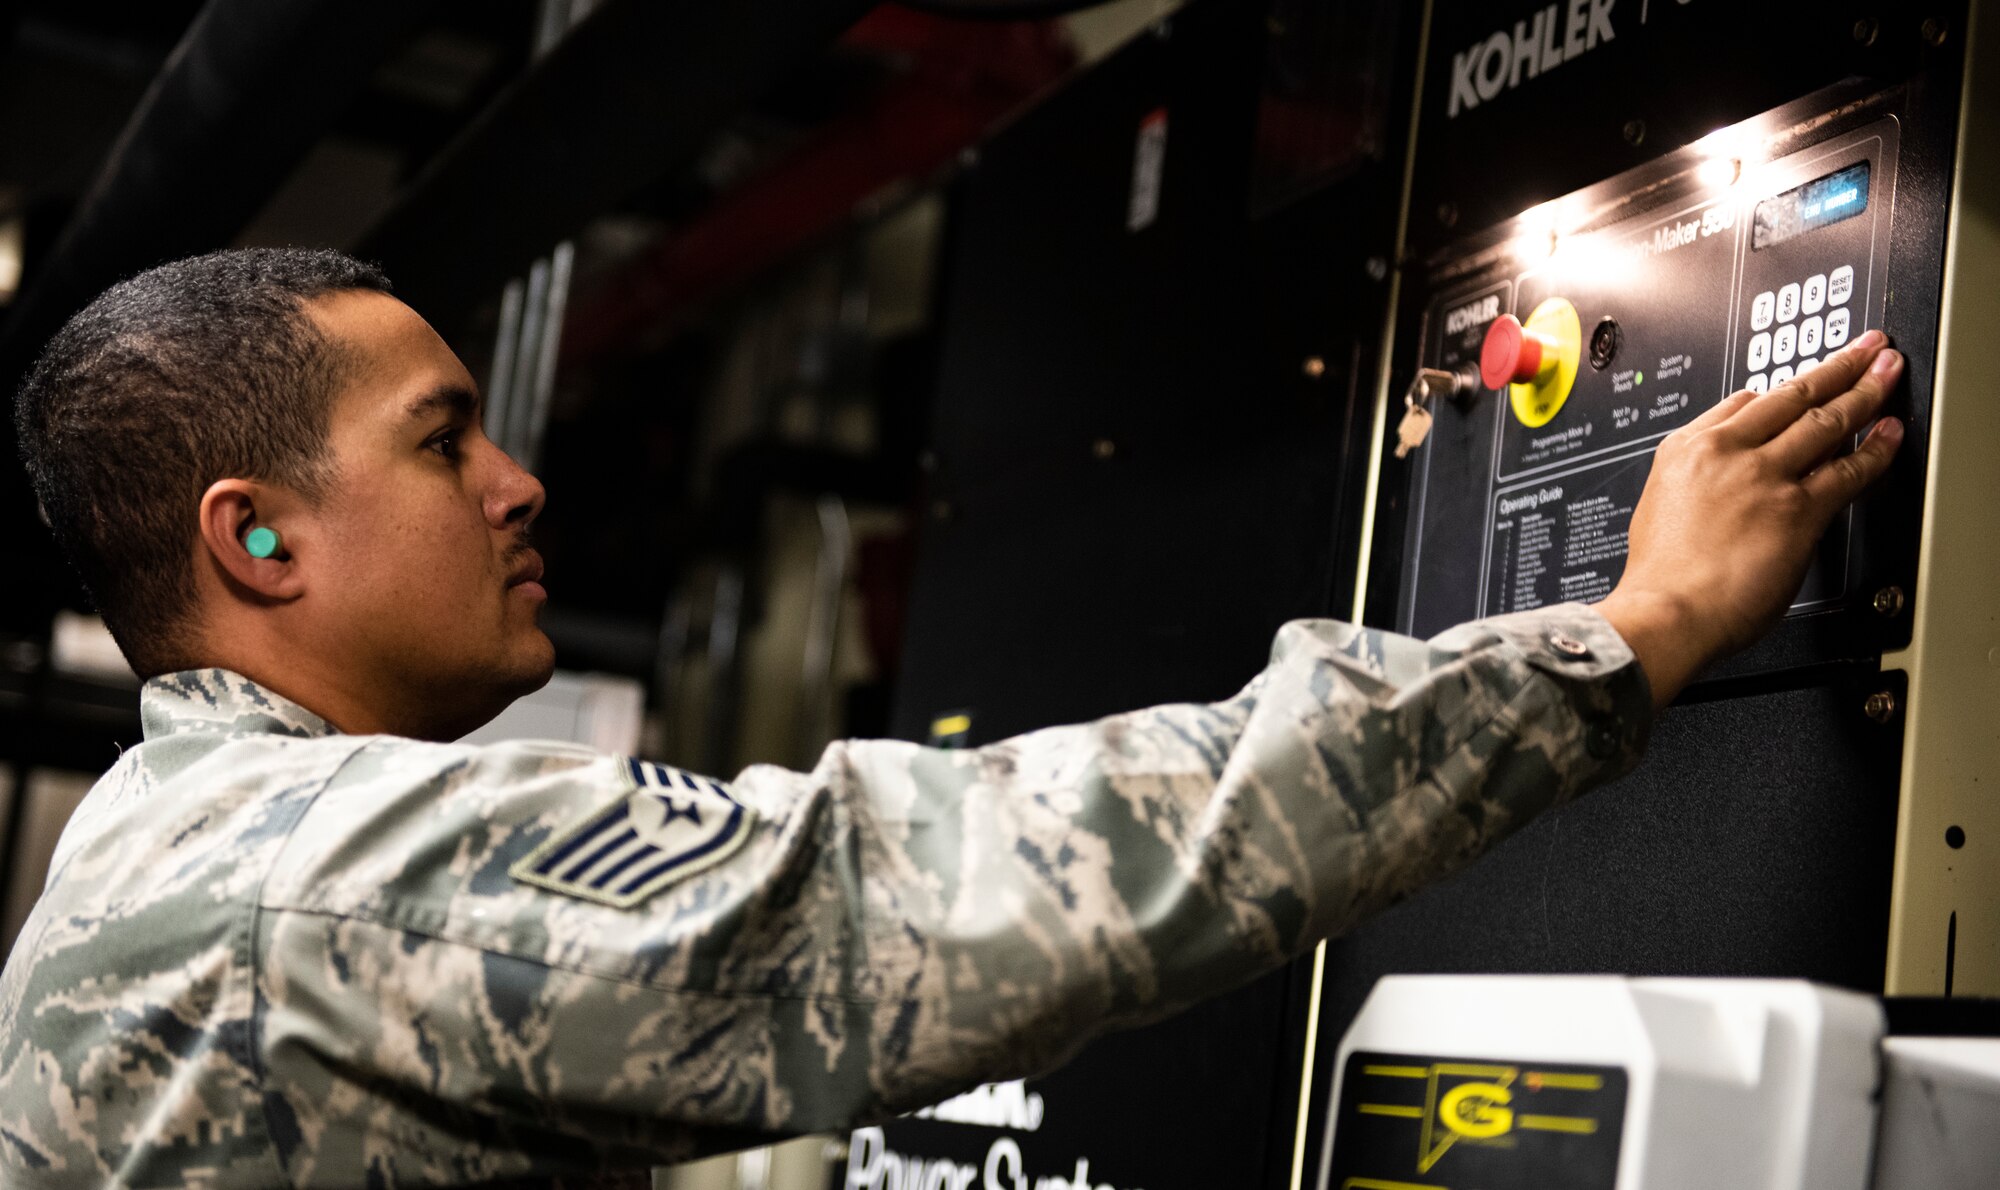 U.S. Air Force Staff Sgt. Bryson Ott, 8th Civil Engineer Squadron generator systems non-comissioned officer in charge, checks the data readings of a diesel generator at Kunsan Air Base, Republic of Korea, Dec. 20, 2018. Several facilities are equipped with emergency power systems to keep their operations going in austere conditions. (U.S. Air Force photo by Senior Airman Stefan Alvarez)